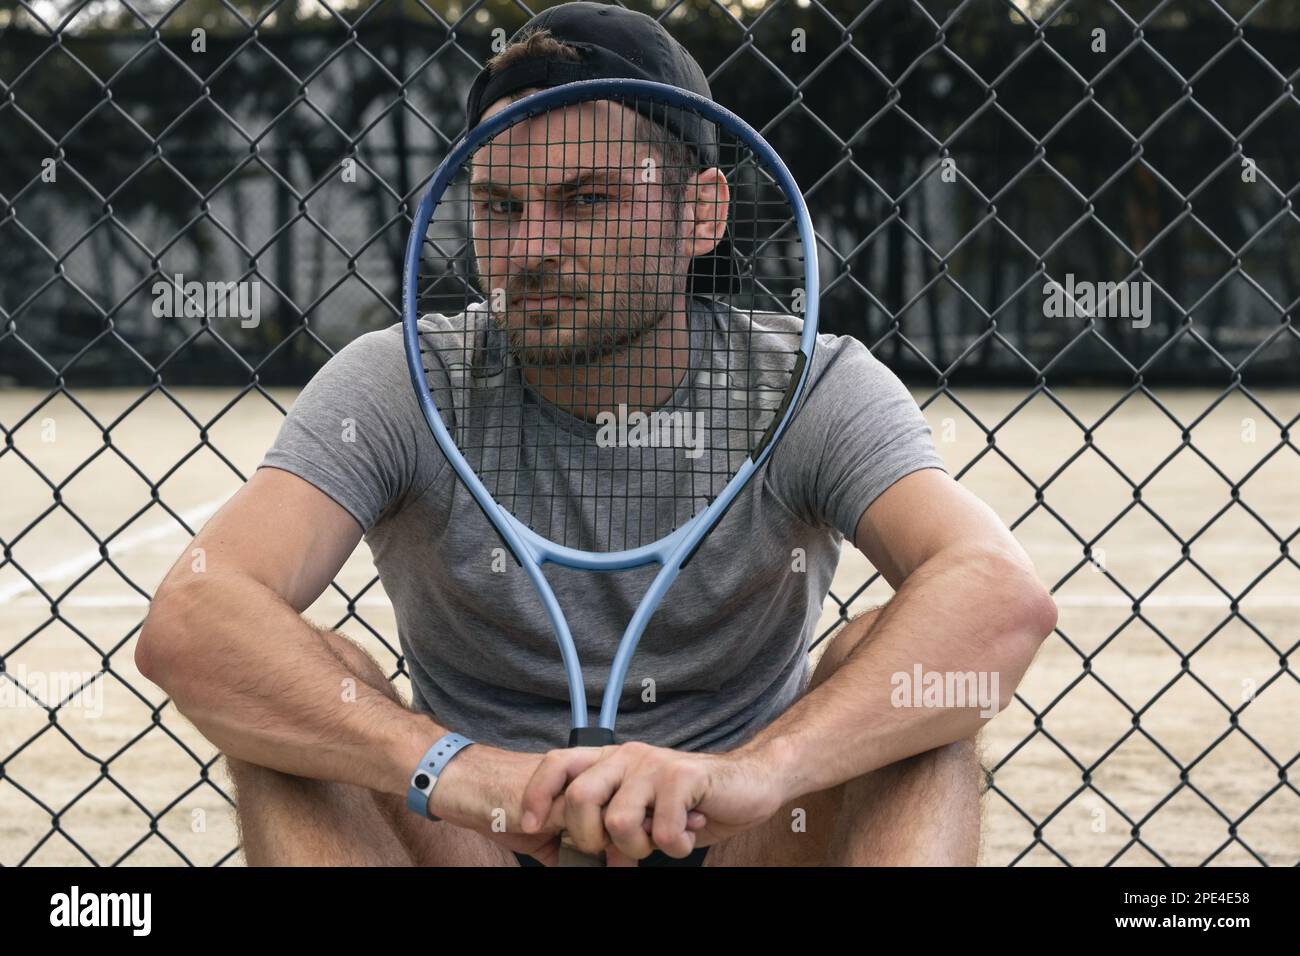 Tennis player sits on tennis court looking at camera through tennis racquet. Stock Photo